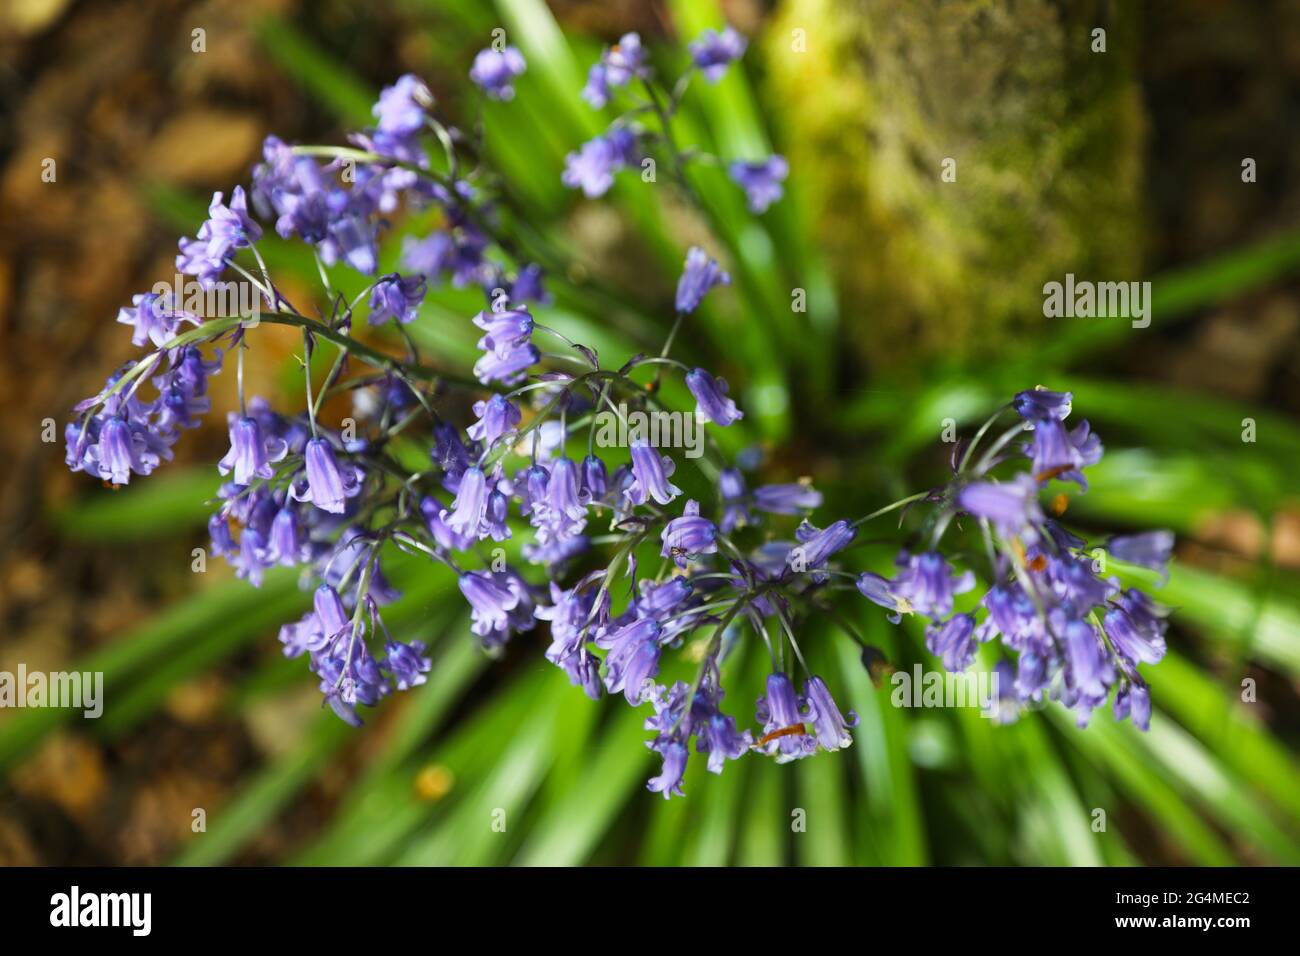 English Woodland. A clump of Bluebell flowers, viewed from above, growing at One Tree Hill ancient woodland in Kent, England. Stock Photo